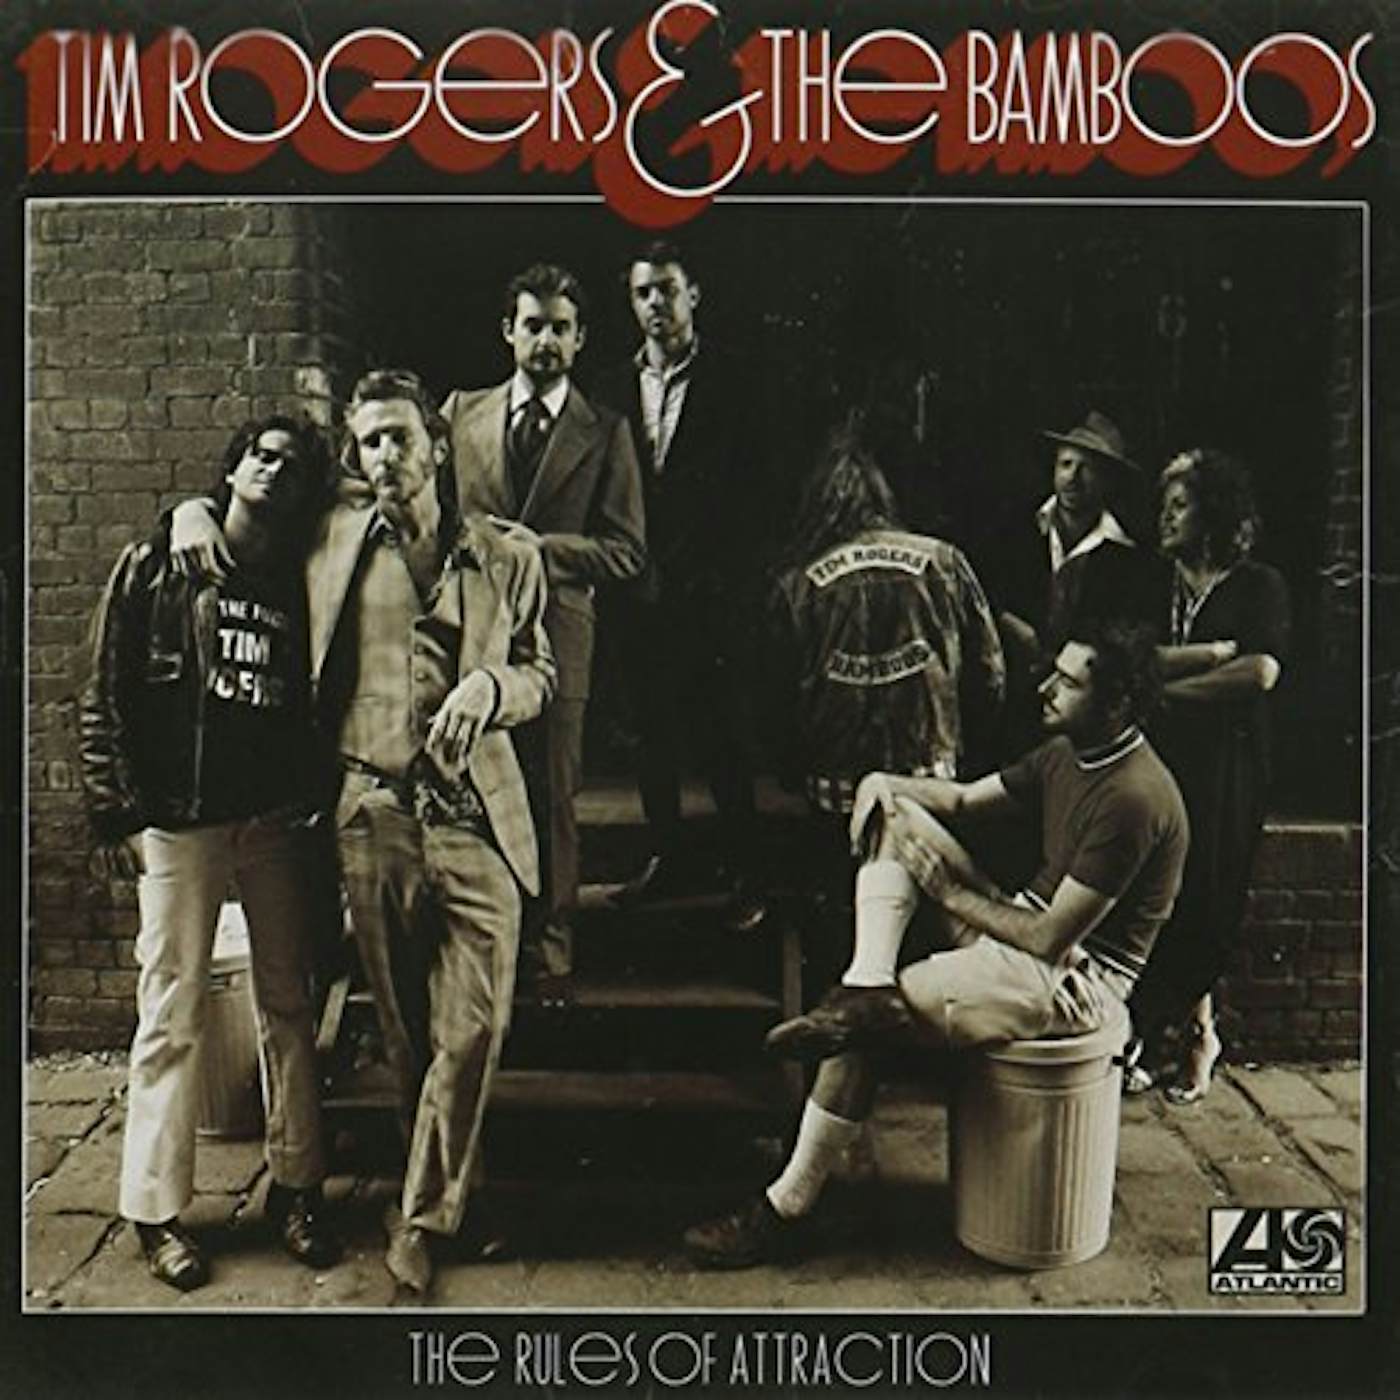 Tim Rogers & the Bamboos RULES OF ATTRACTION CD